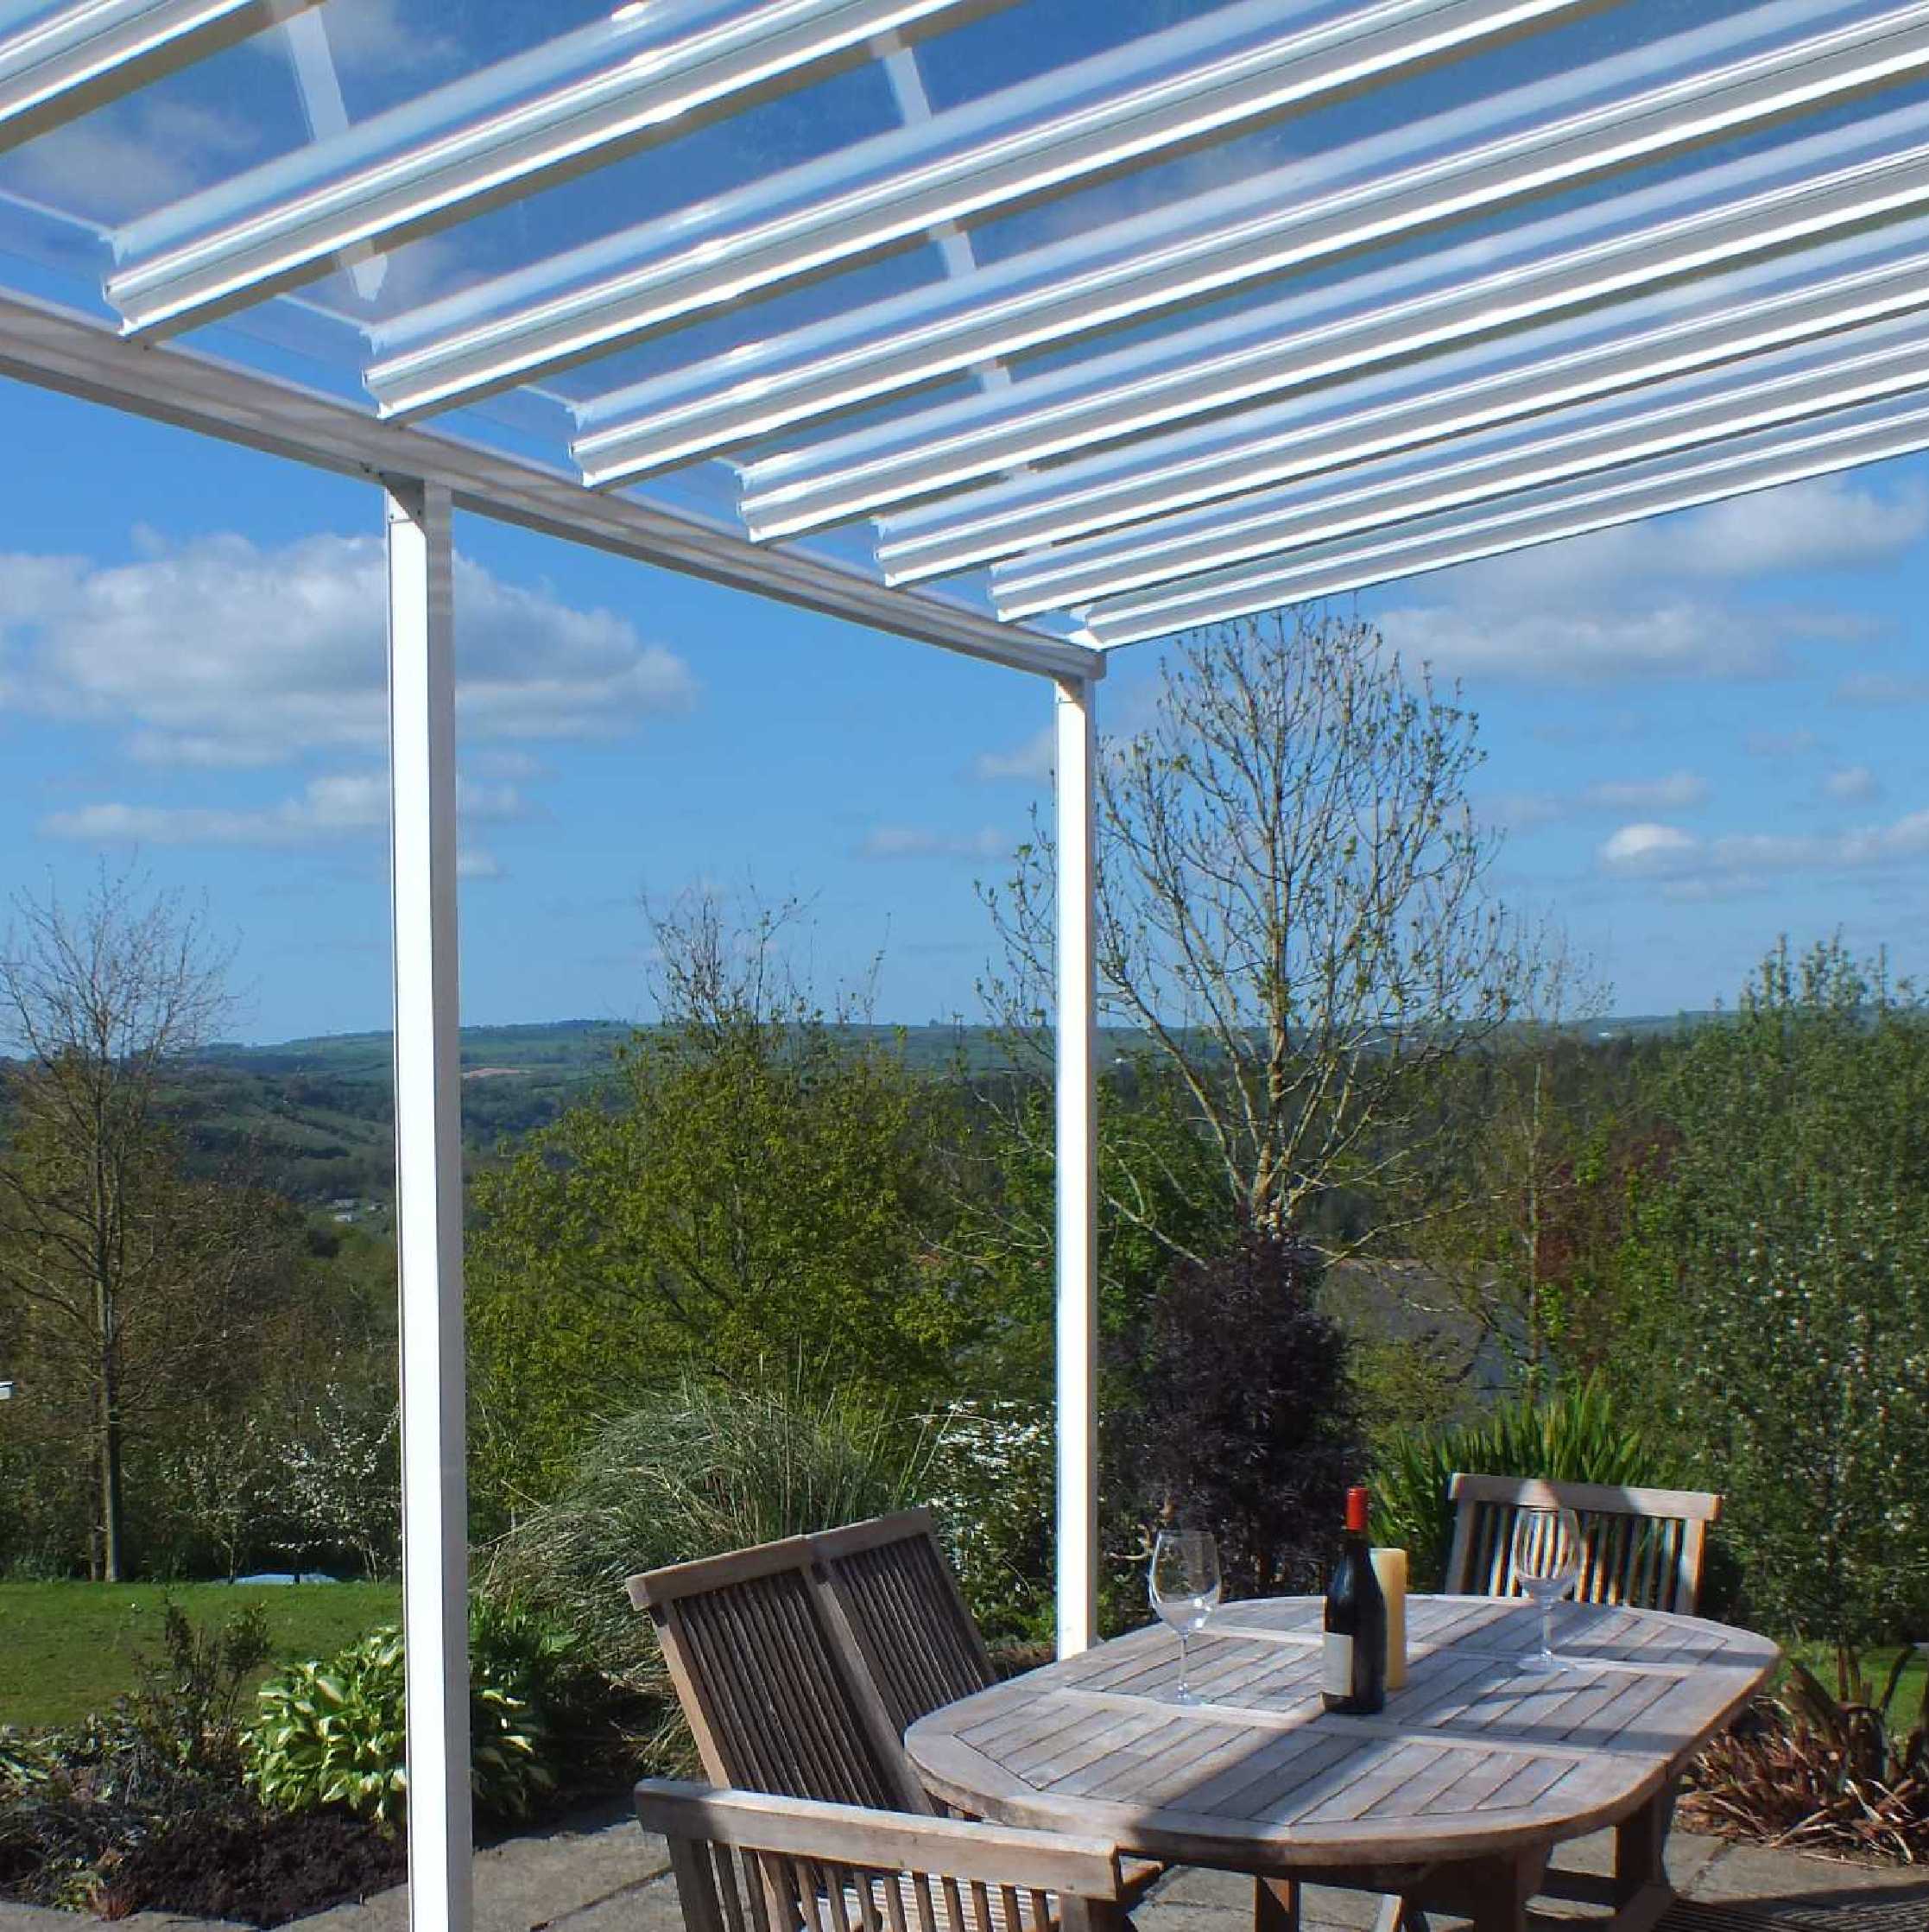 Buy Omega Smart Lean-To Canopy, White with 6mm Glass Clear Plate Polycarbonate Glazing - 7.7m (W) x 2.0m (P), (4) Supporting Posts online today